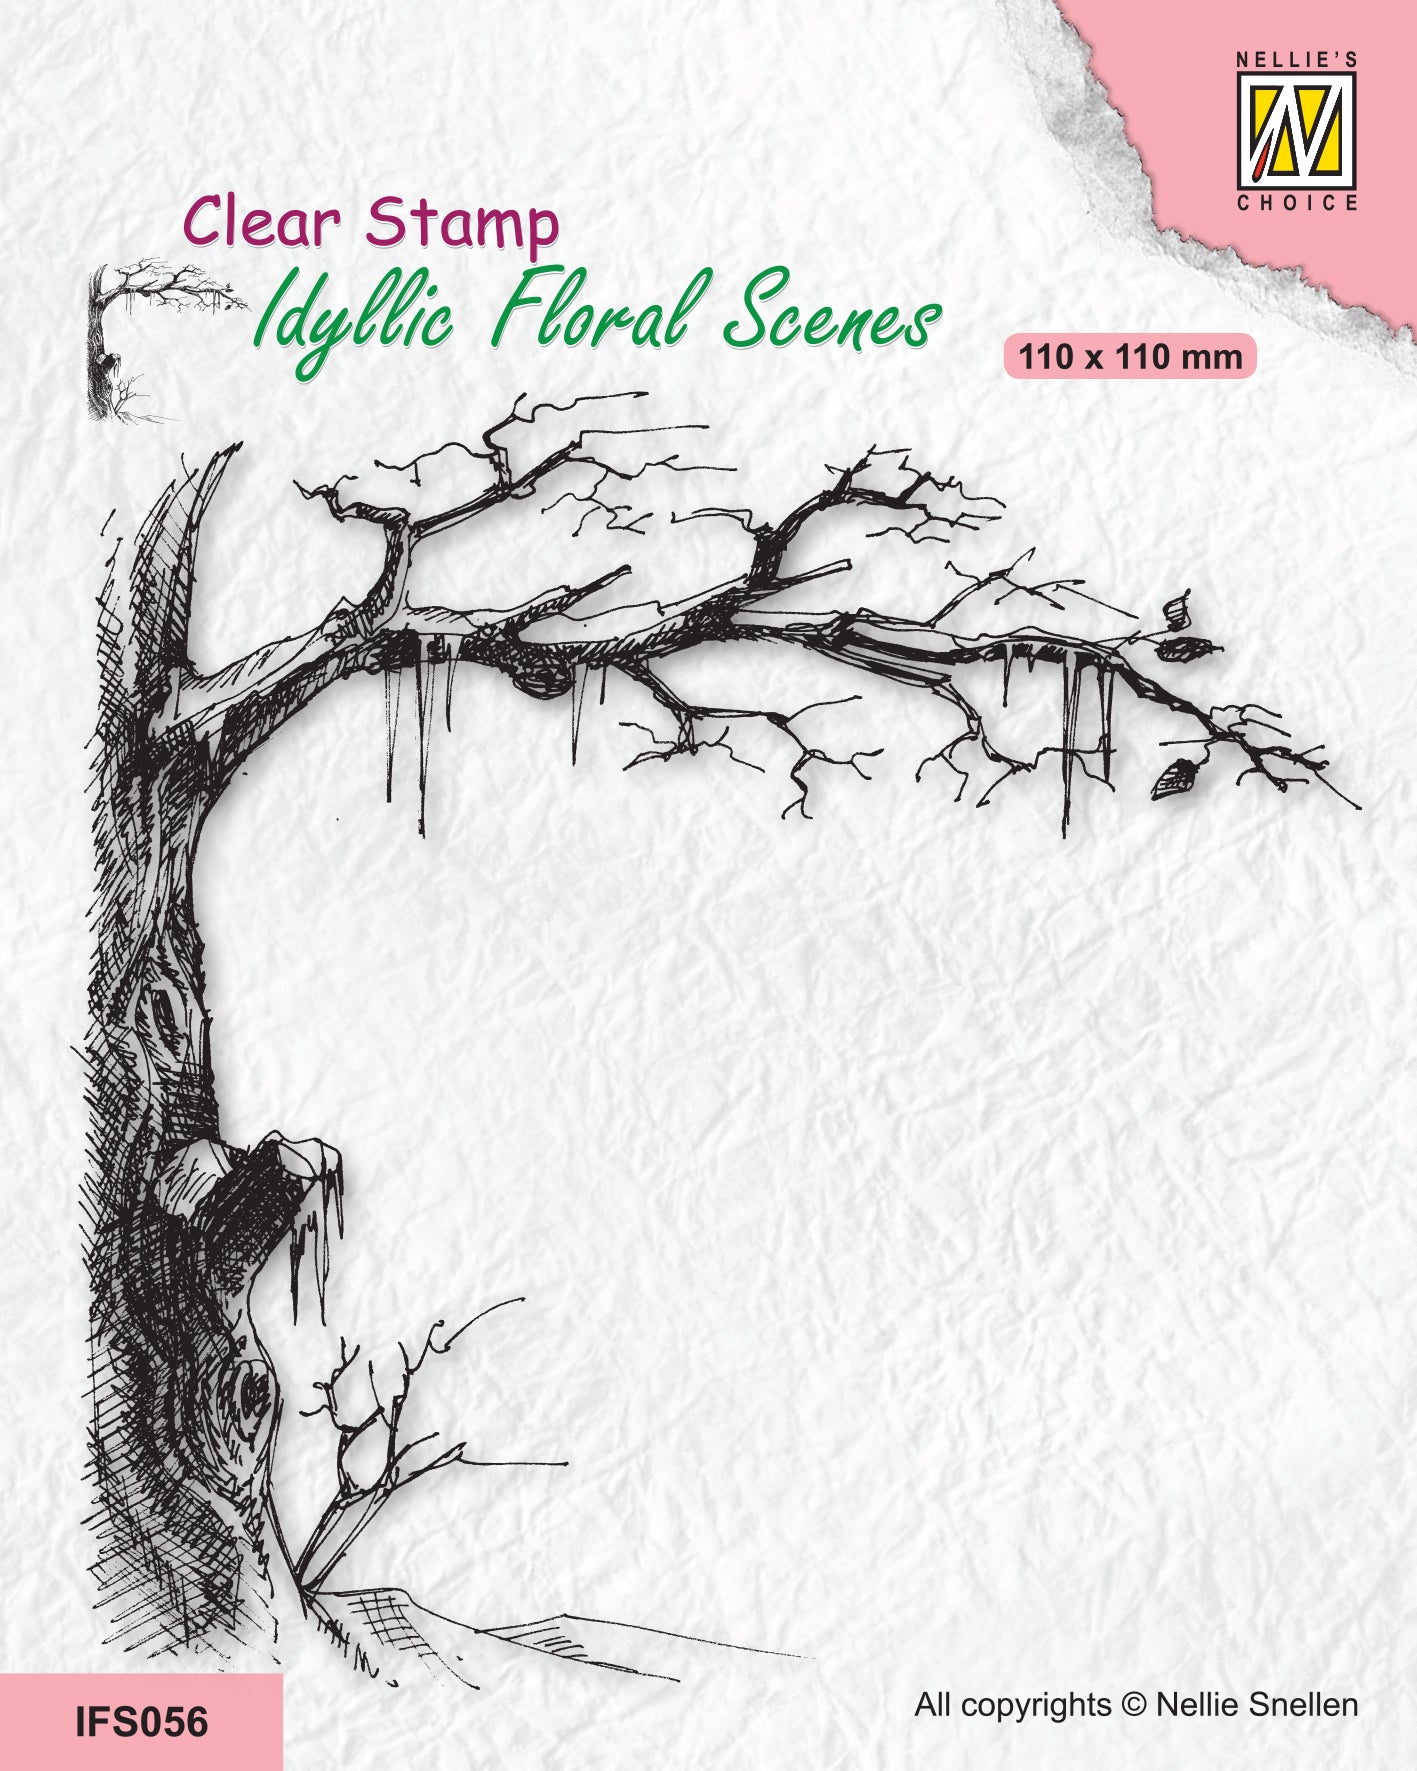 Nellie's Choice Clear Stamp Idyllic Floral Scene - Icy Tree